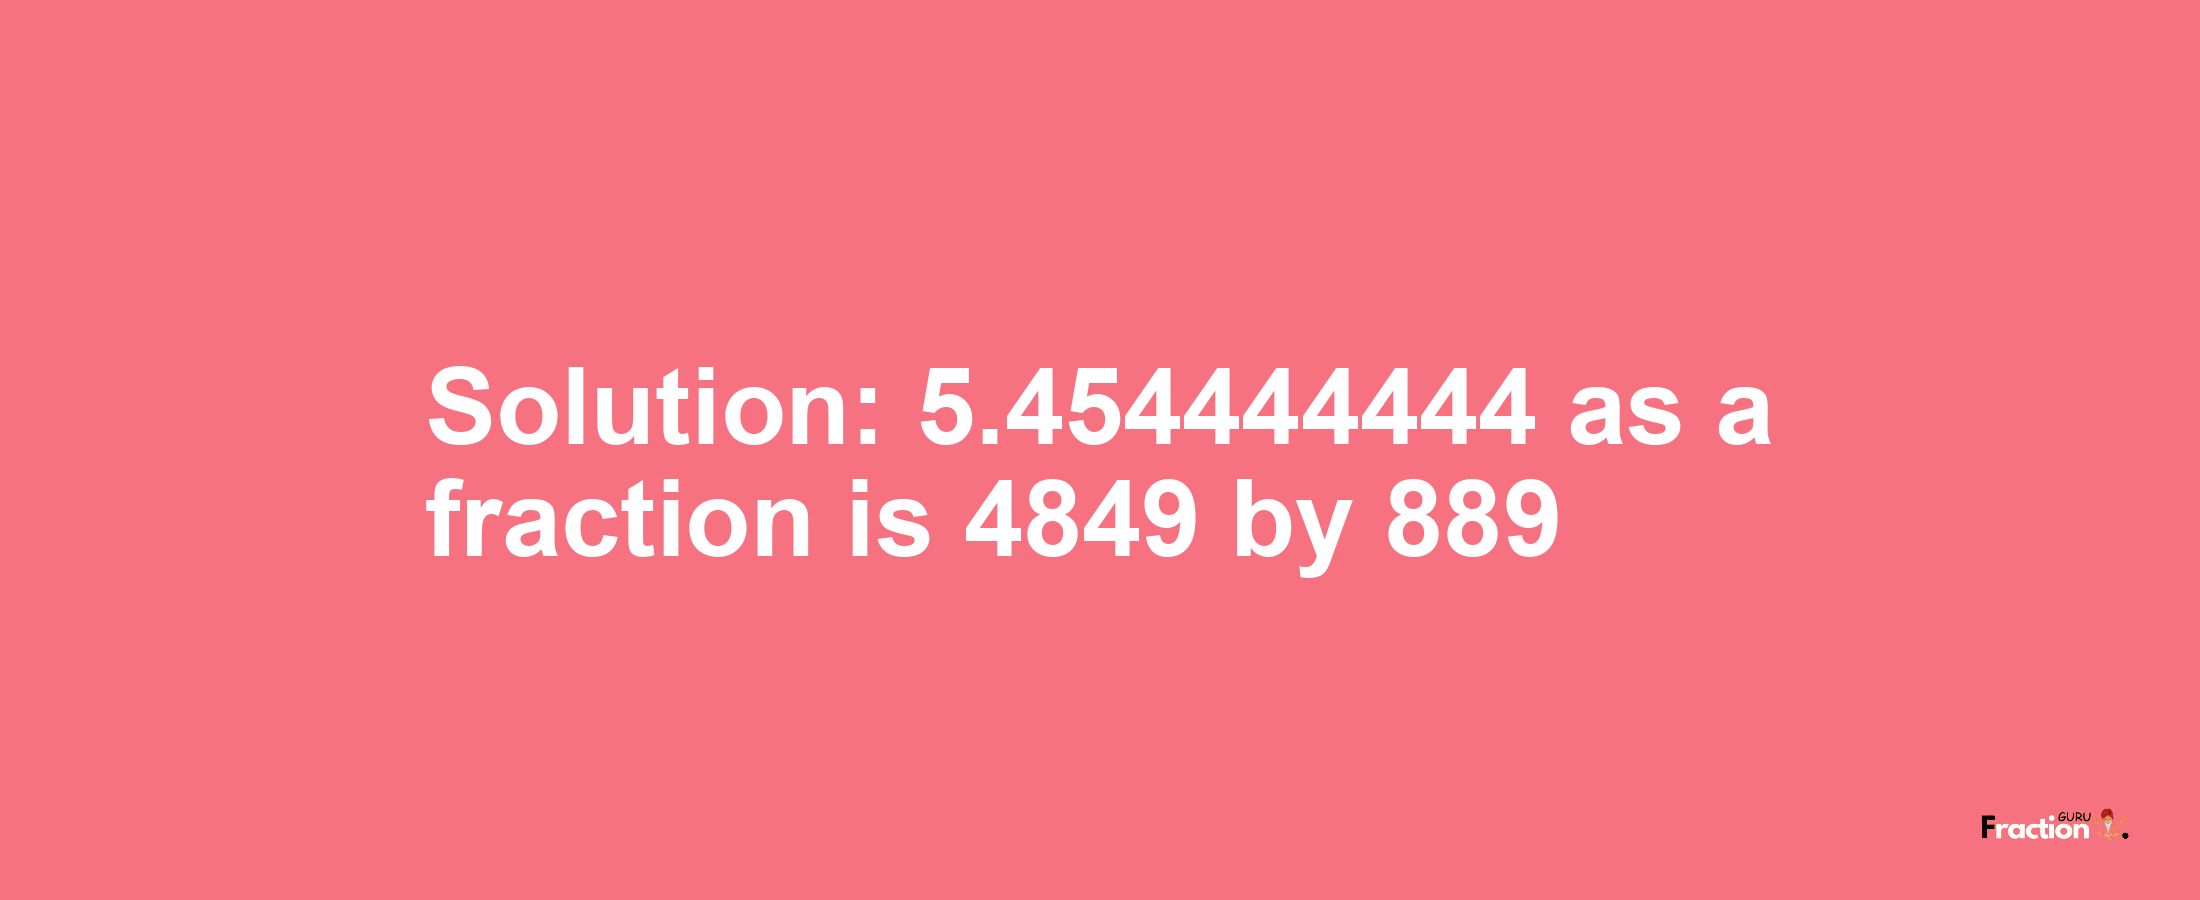 Solution:5.454444444 as a fraction is 4849/889